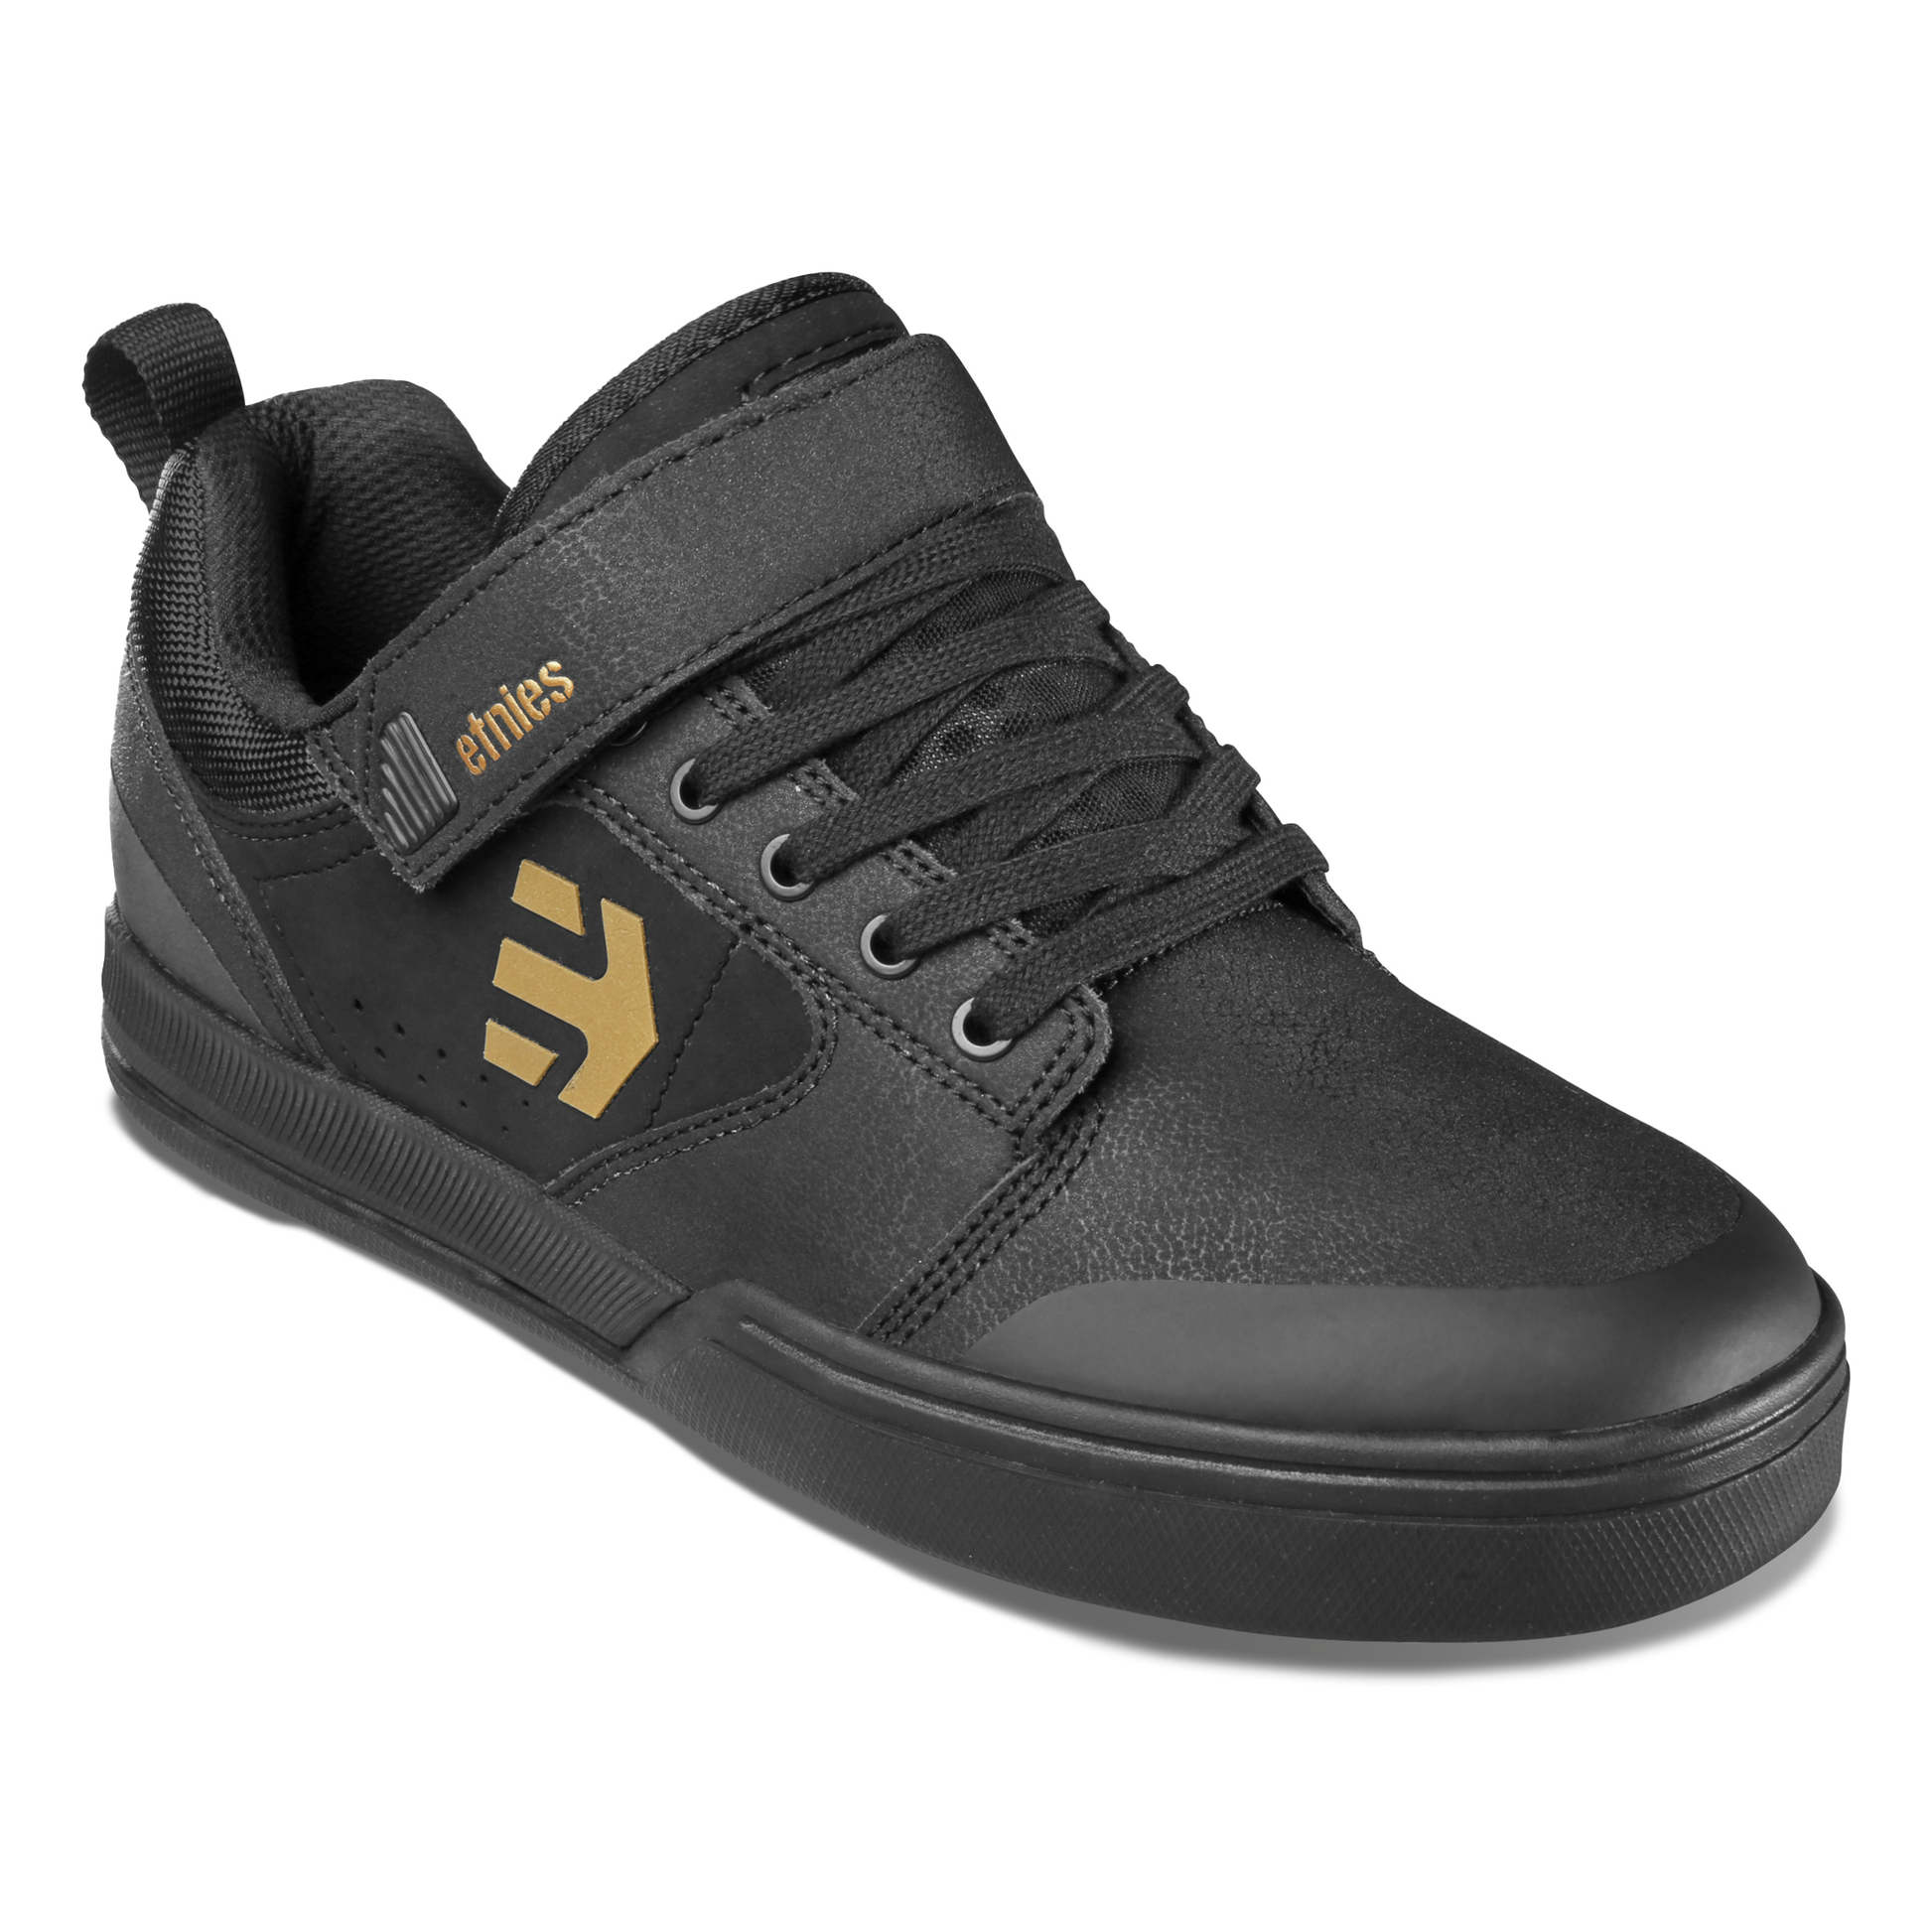 Etnies Camber Clip Clipless Shoes - US 13.0 - Black - Gold - Image 2